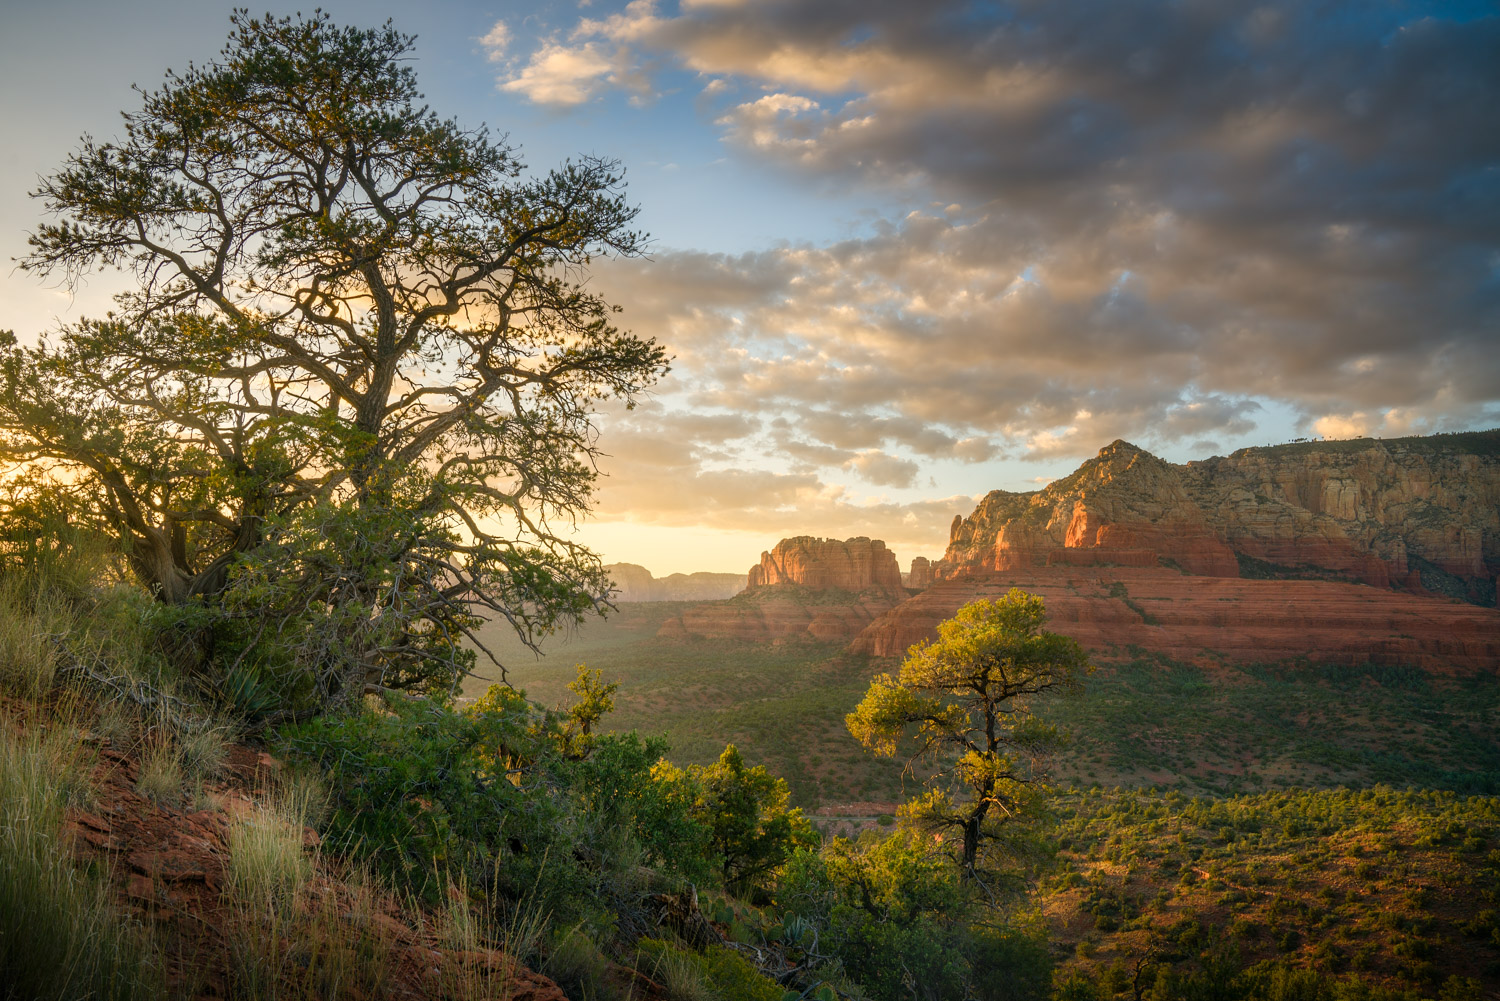 A juniper tree in front of red rock cliffs in Sedona at sunset